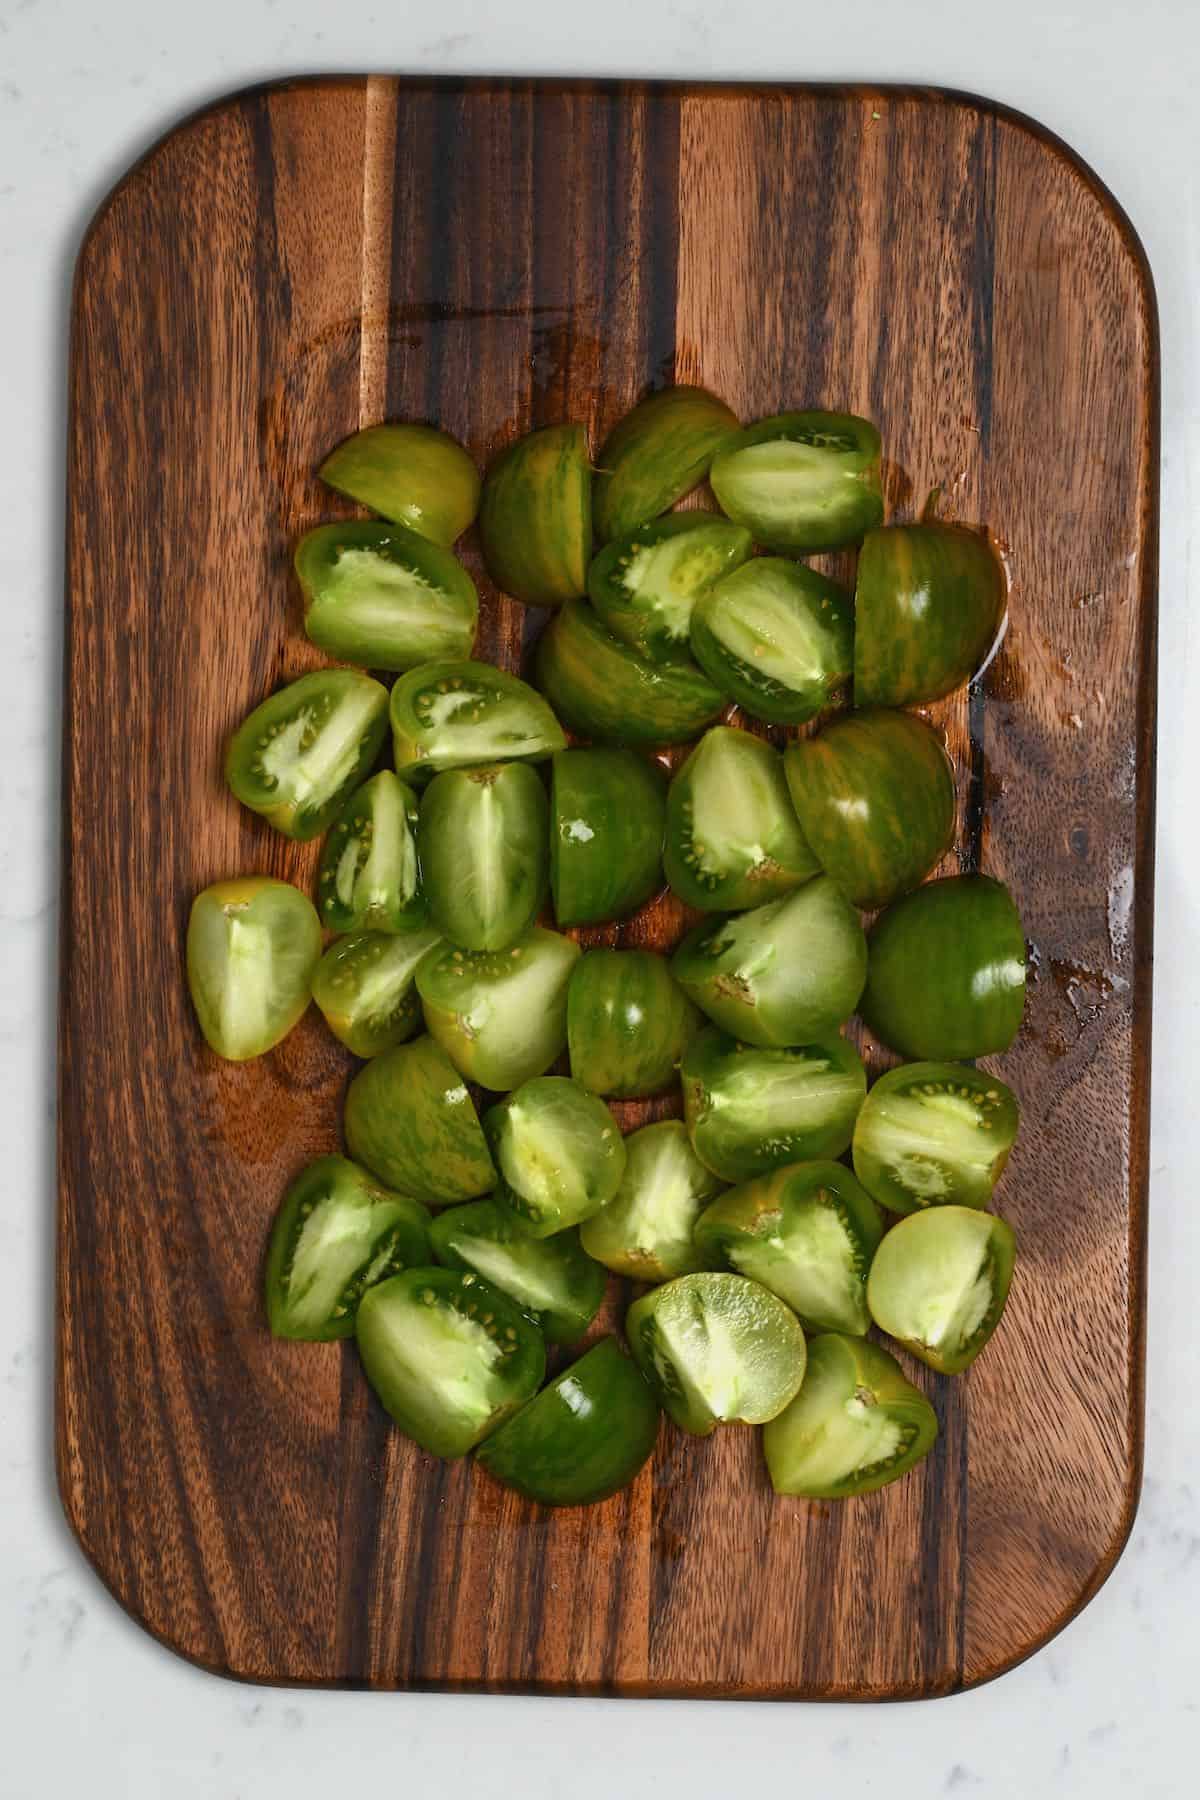 How to Make Pickled Green Tomatoes - Easy Peasy Creative Ideas